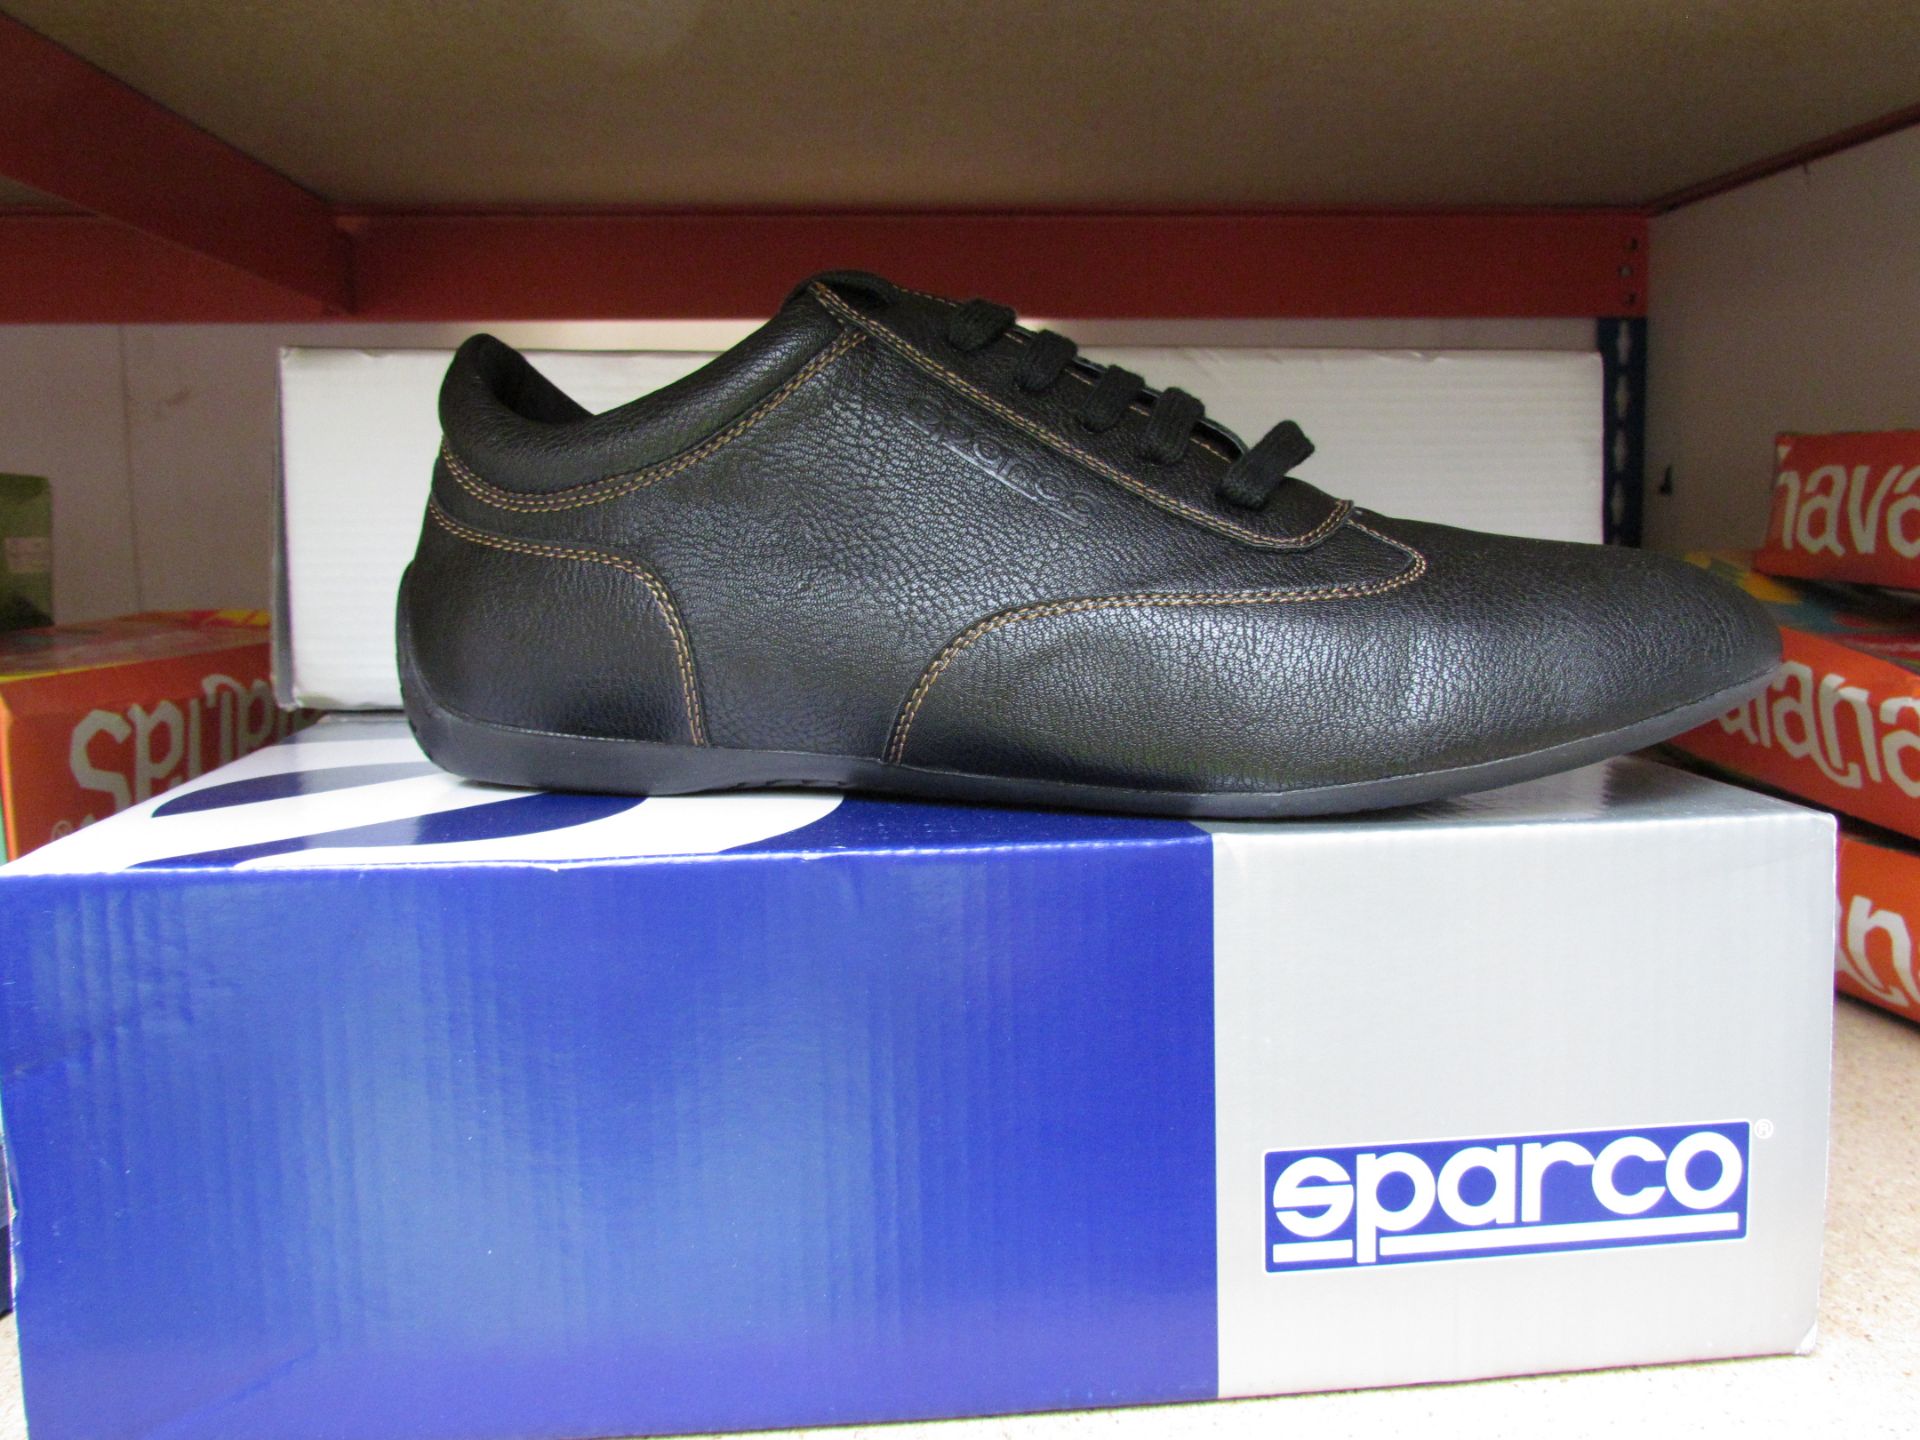 5X SPARCO SHOES IN SIZES 43 44